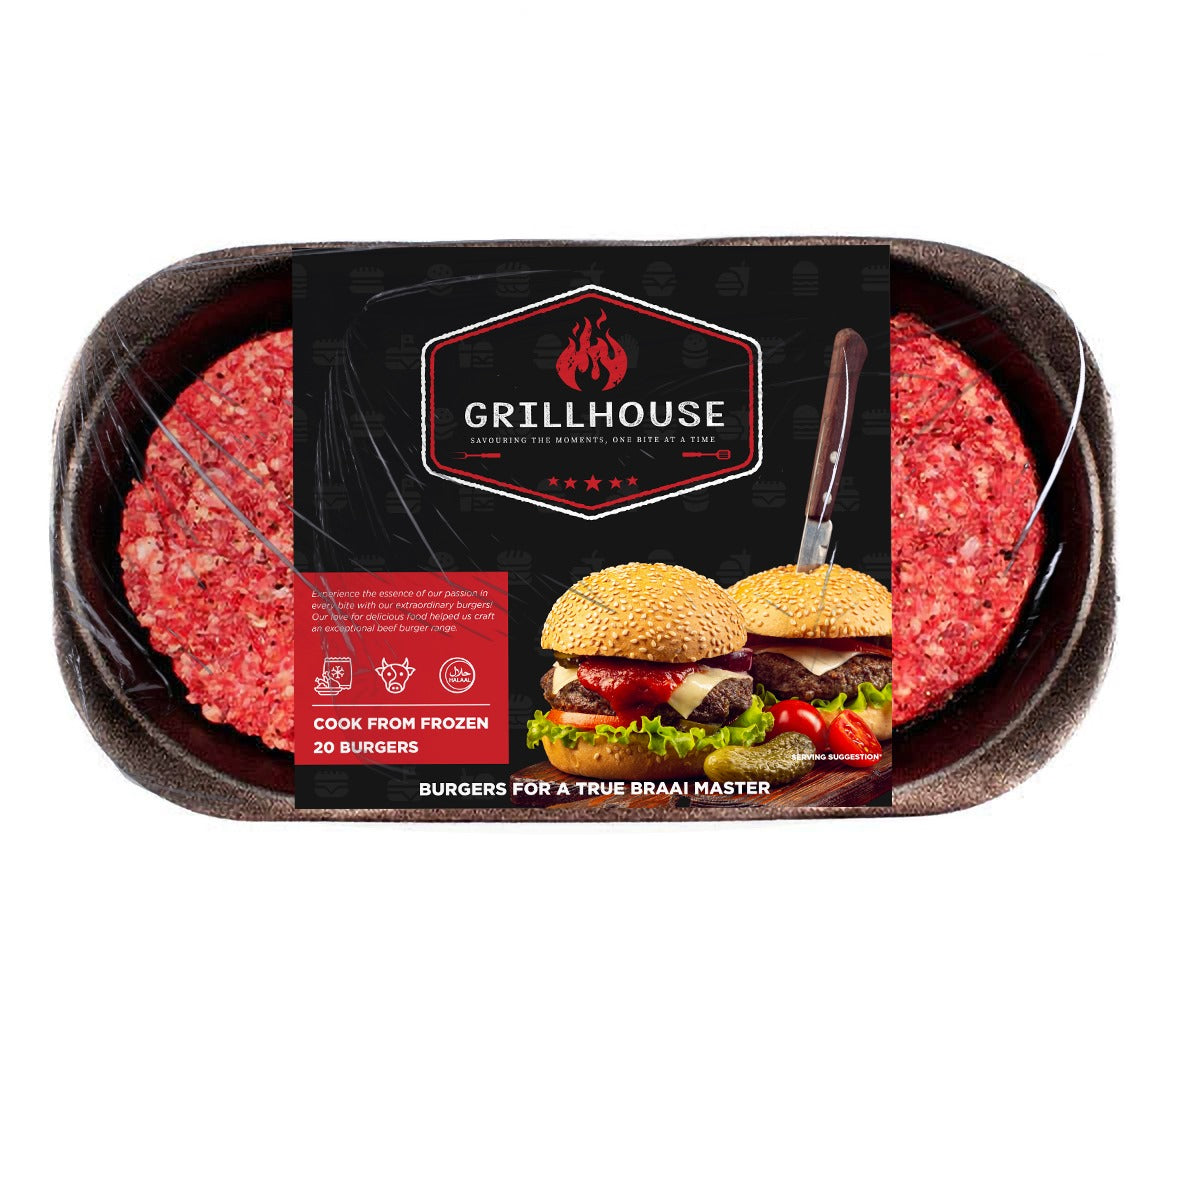 Grill House - Beef Burgers - Pack of 4